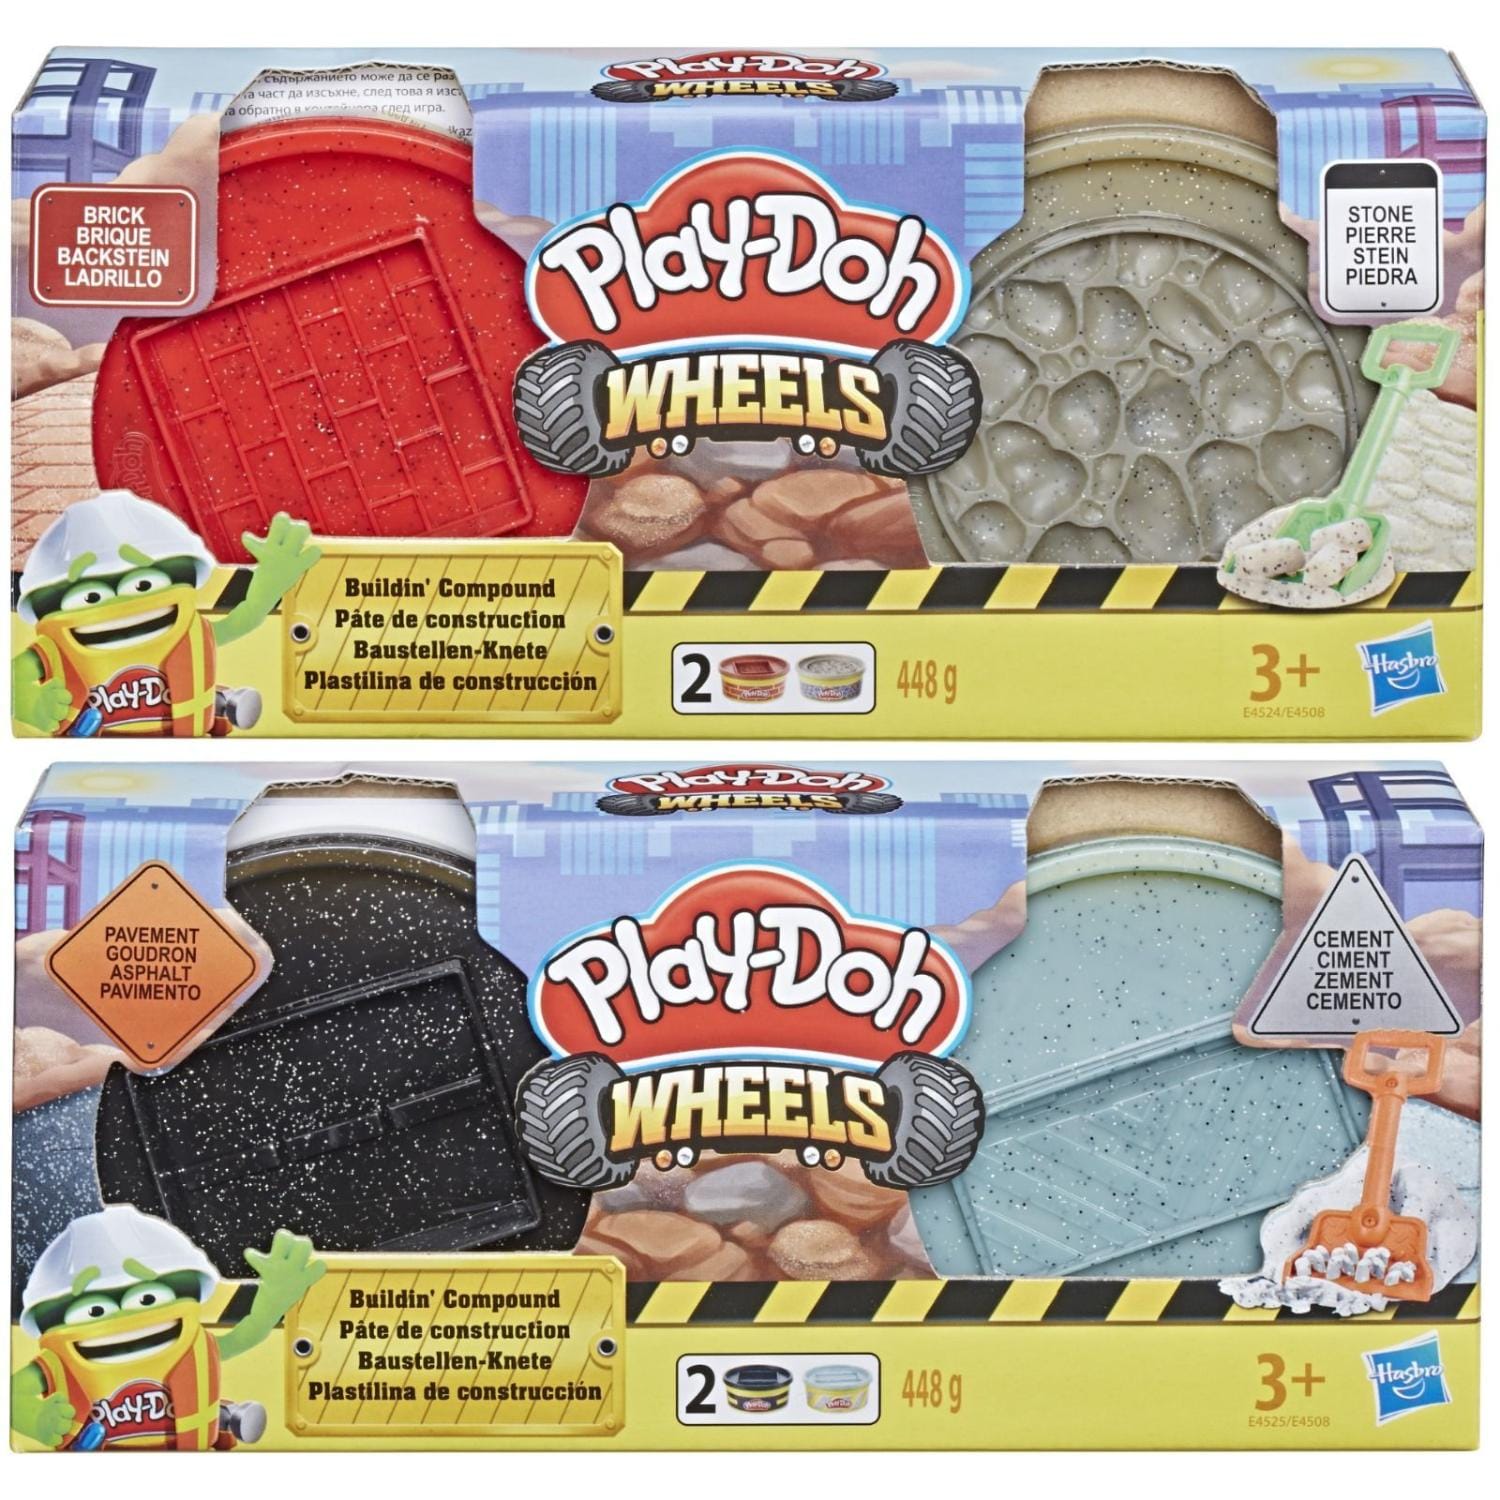 HASBRO Playdoh Building Compound Assorted: Help little workers ages 3 and up get busy building, constructing and demolishing - E4508